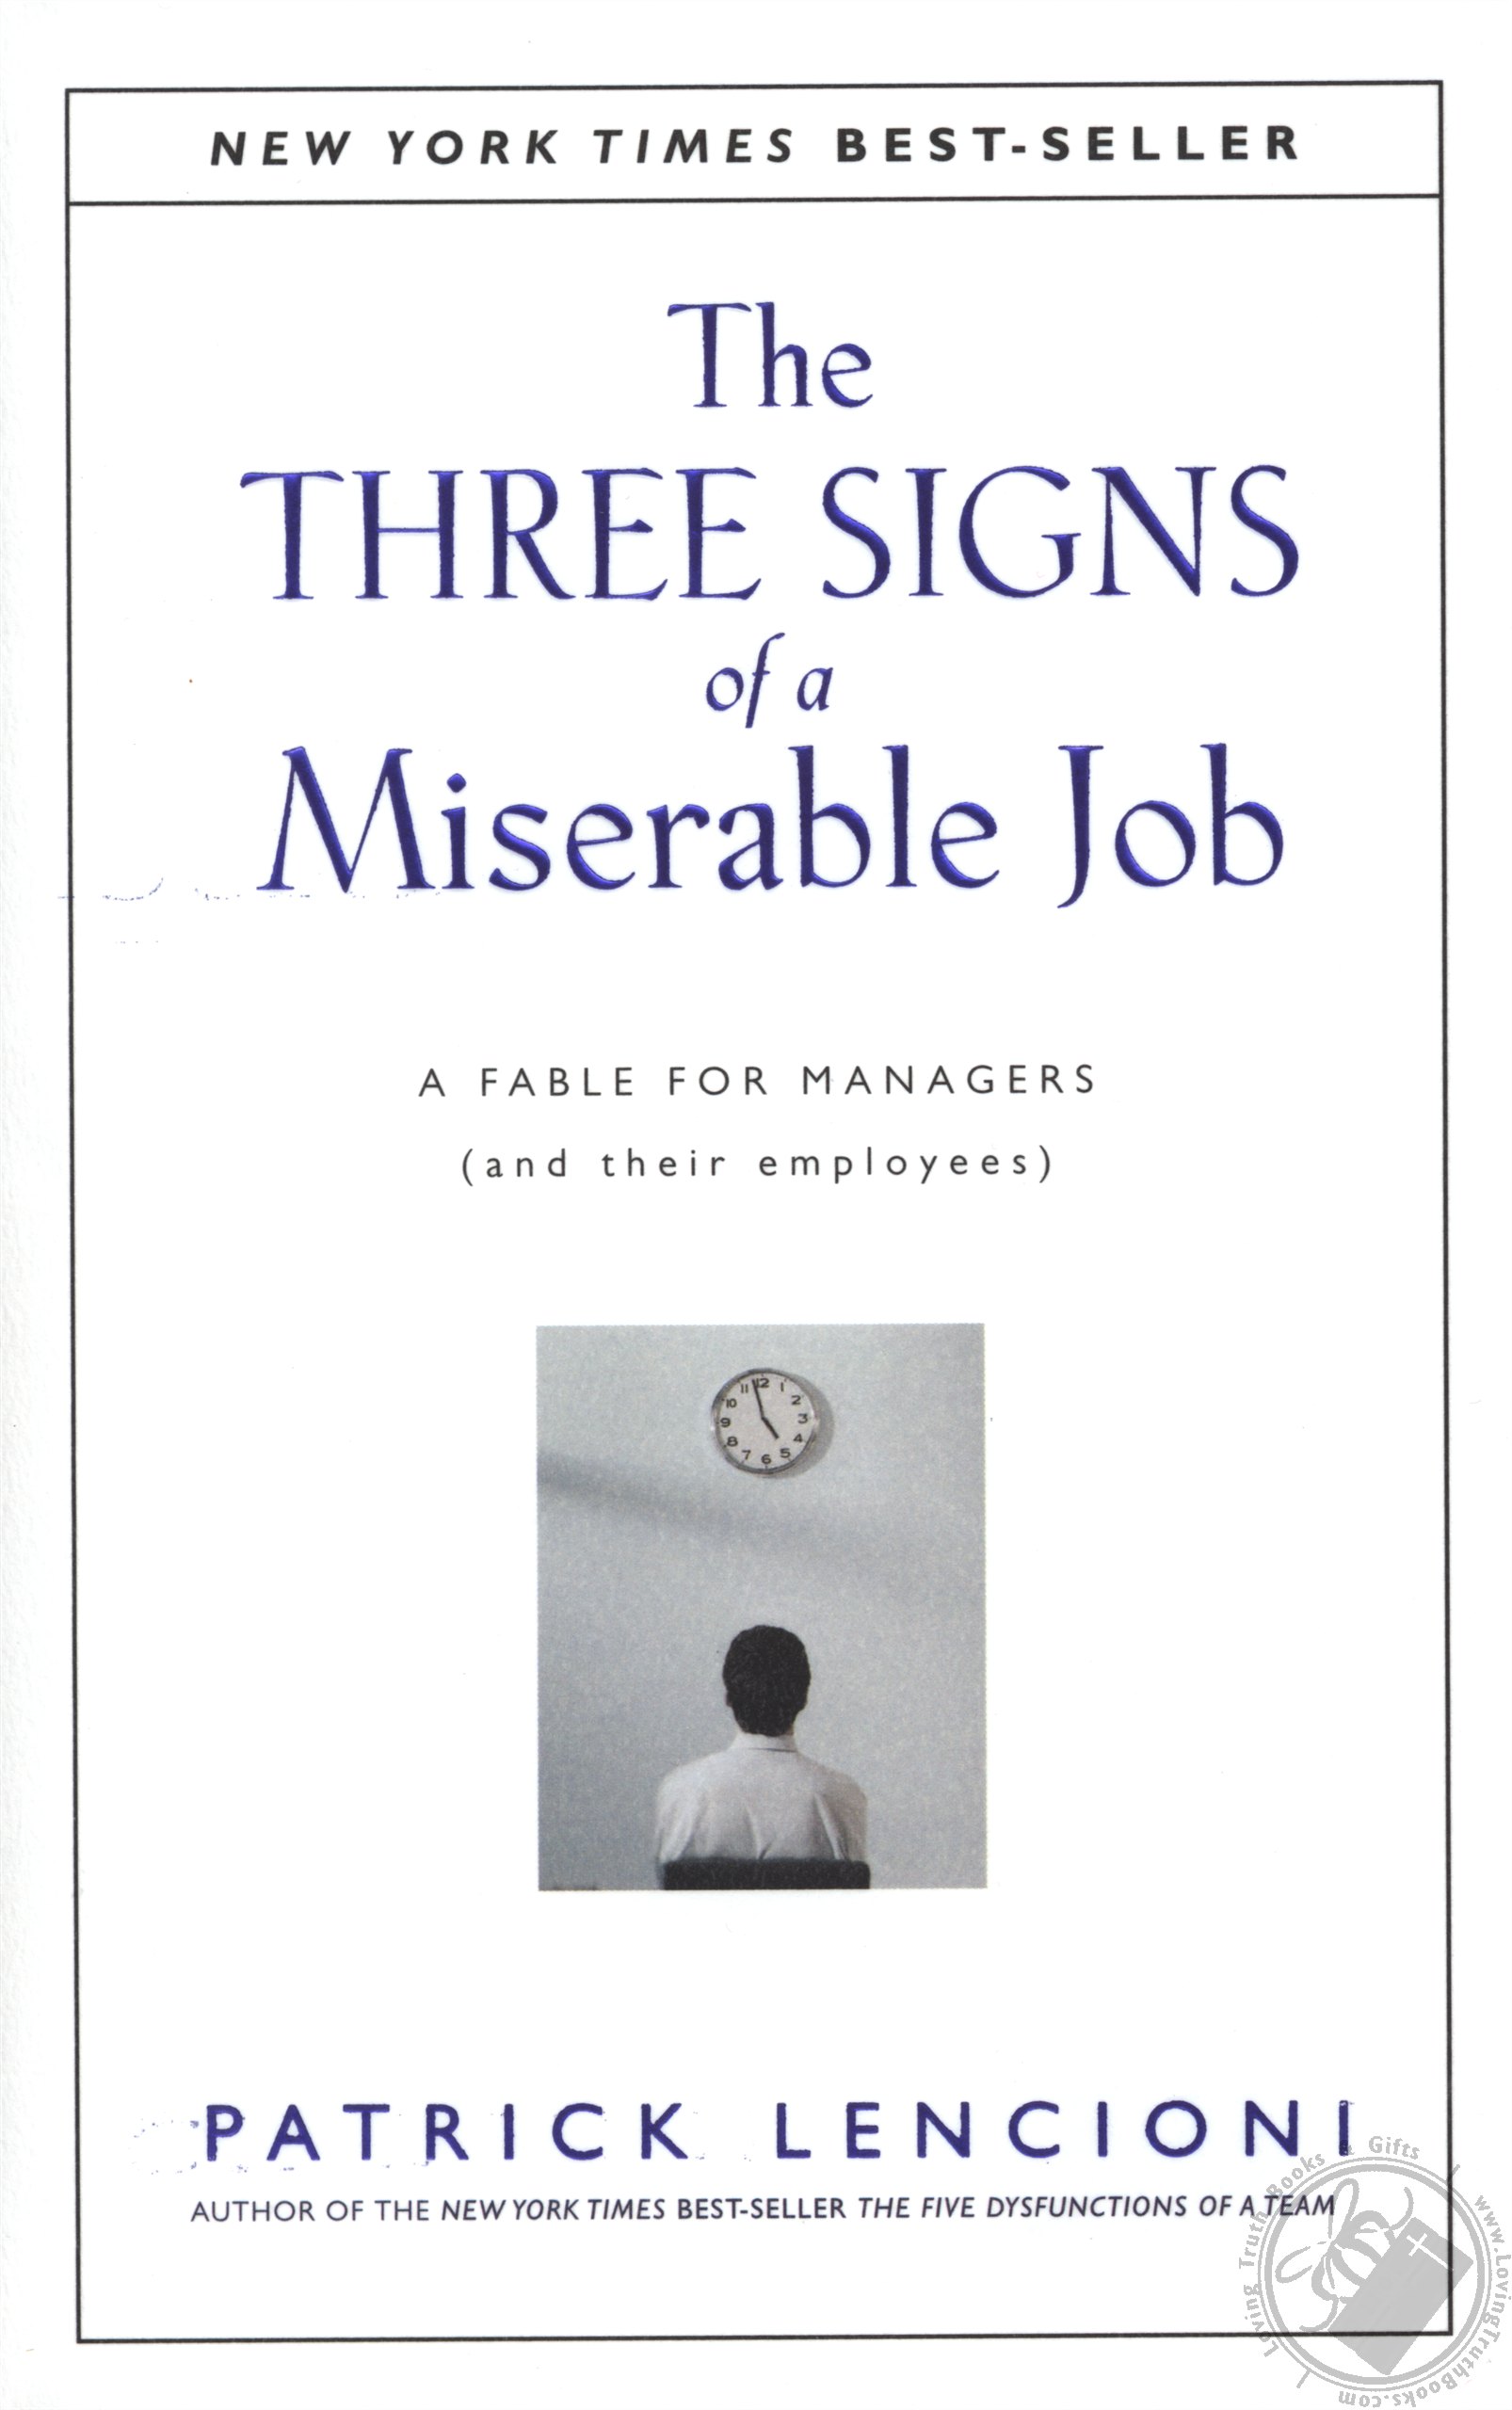 The 3 signs of a miserable job summary